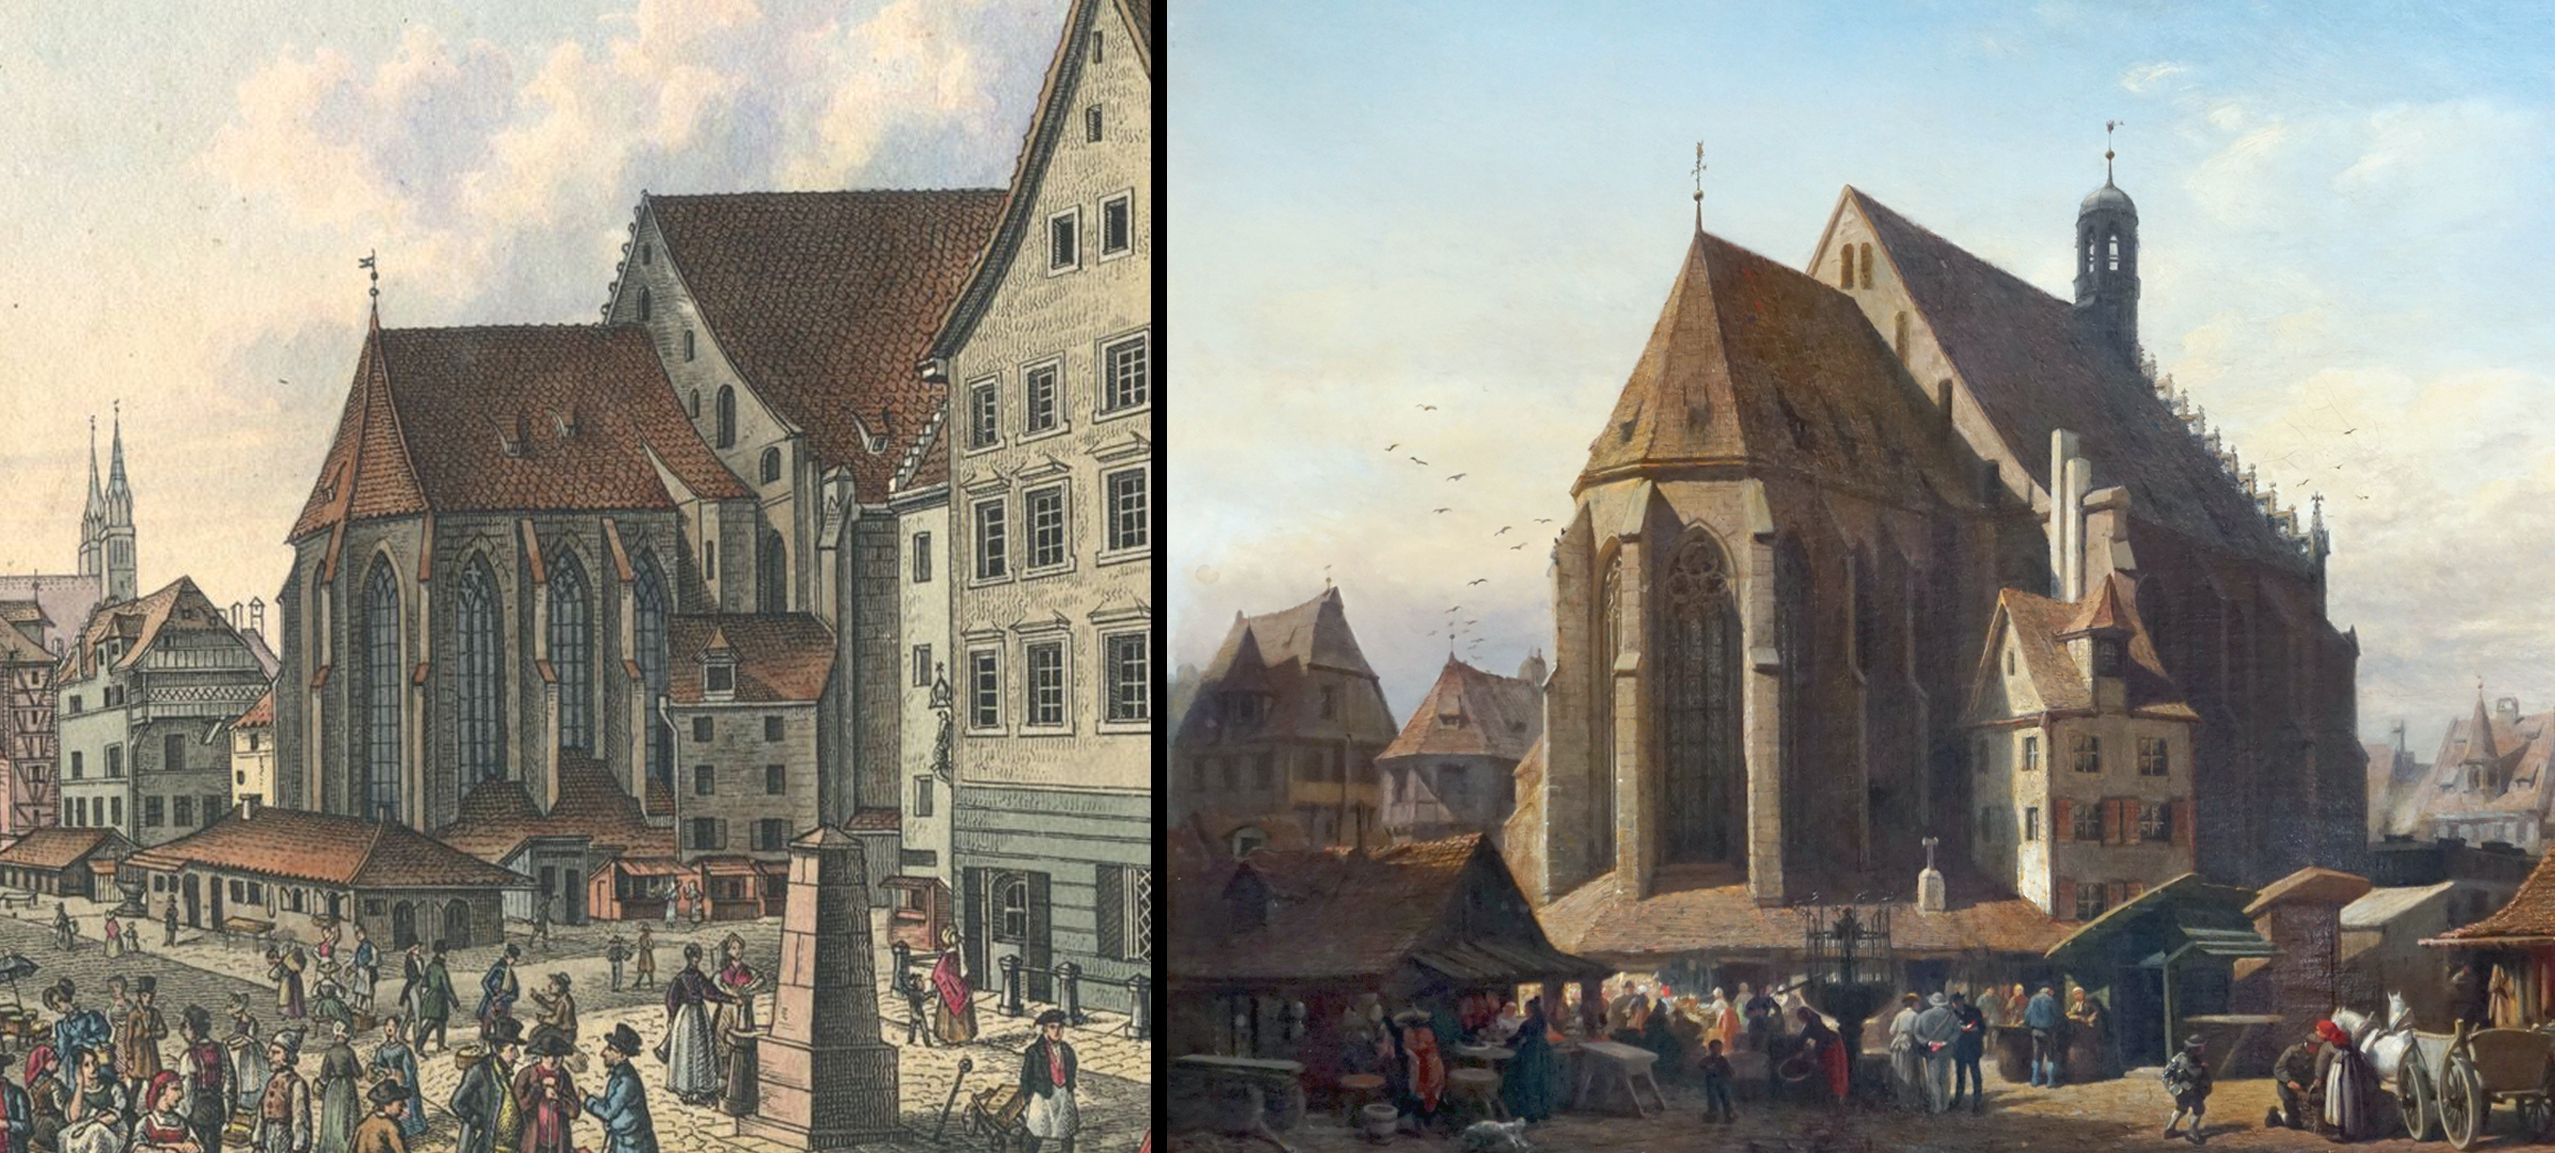 Church of Our Lady in Nuremberg Image comparison / left: from Views of Nuremberg and its environs (1839 / 1842)